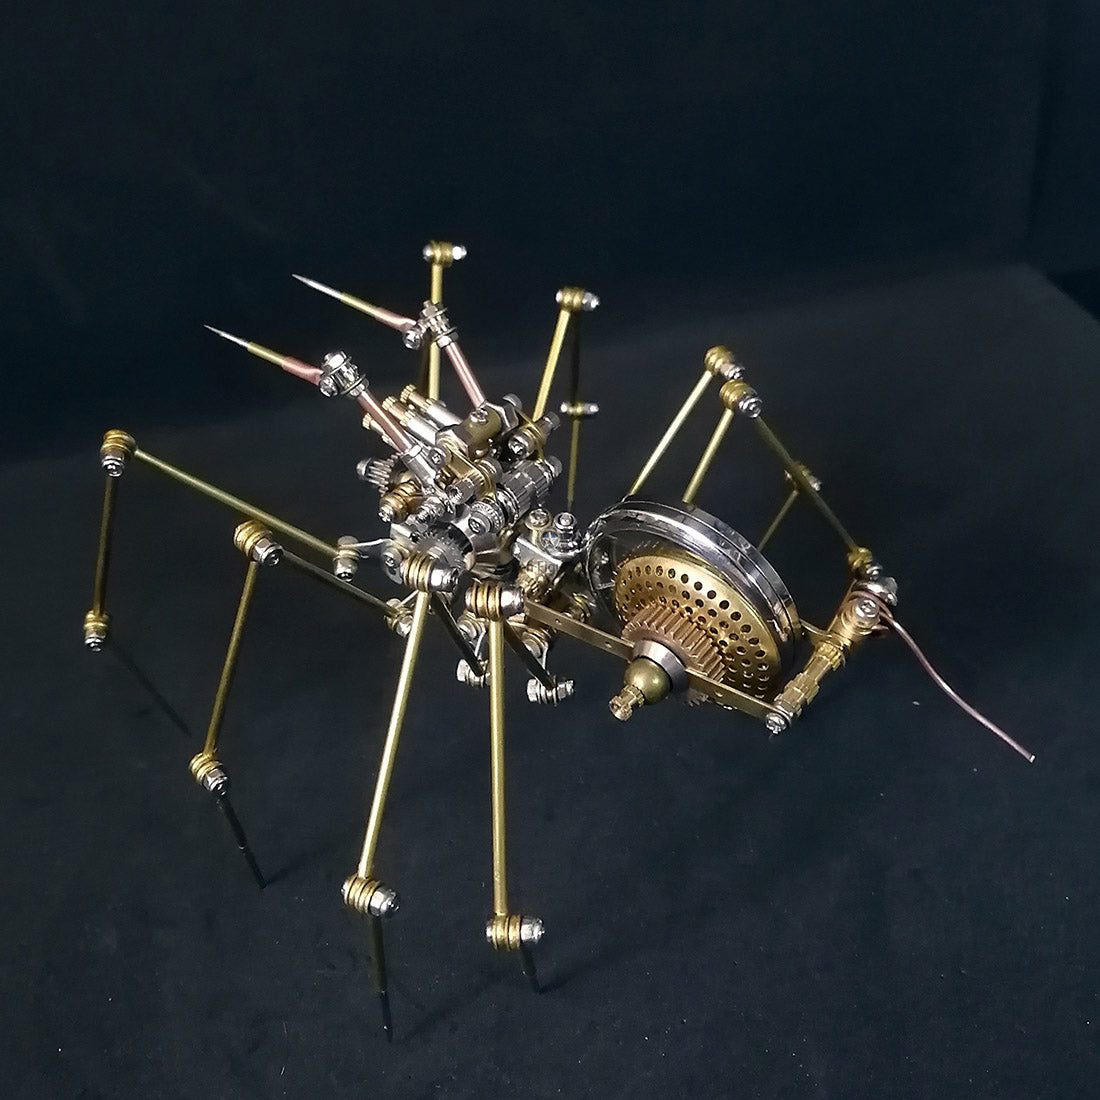 3D Metal Puzzle Steampunk Spider Model Kits with Antique Watch